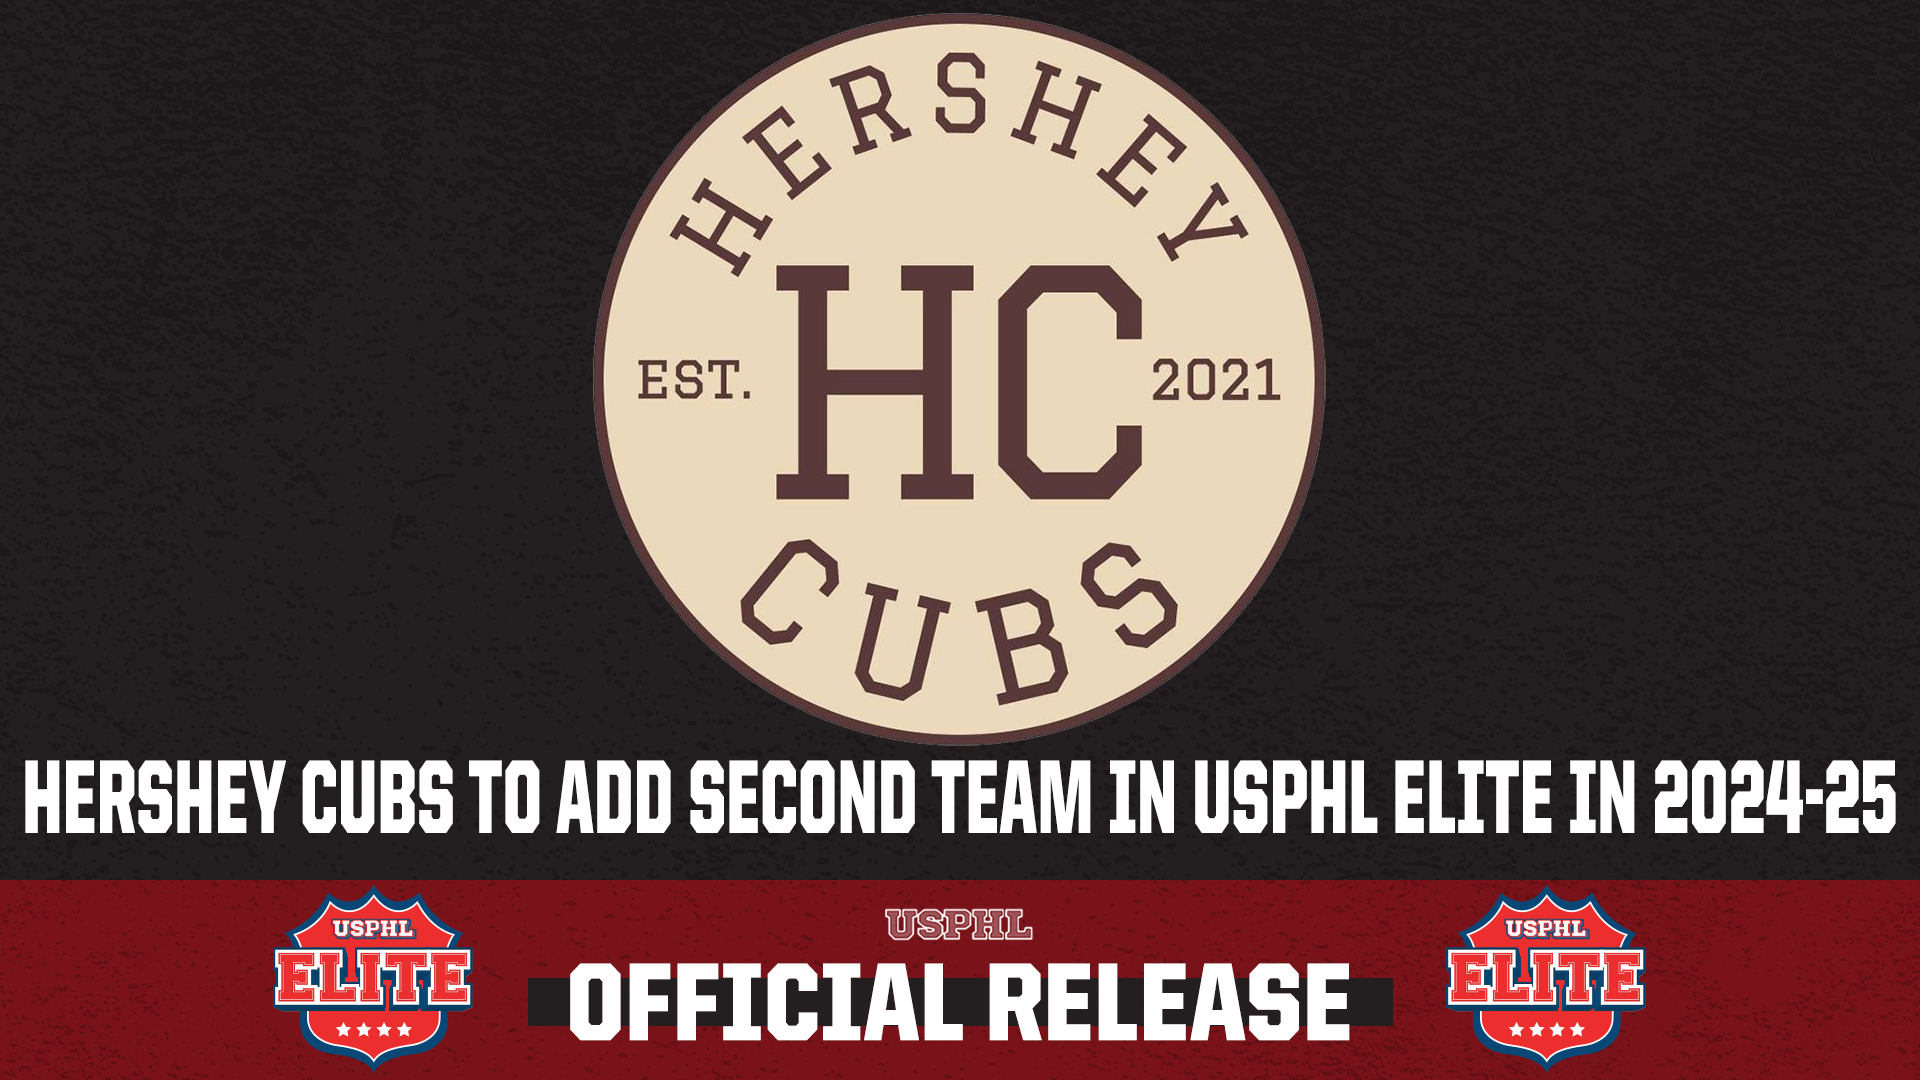 Hershey Cubs To Add Second Team In USPHL Elite For 2024-25